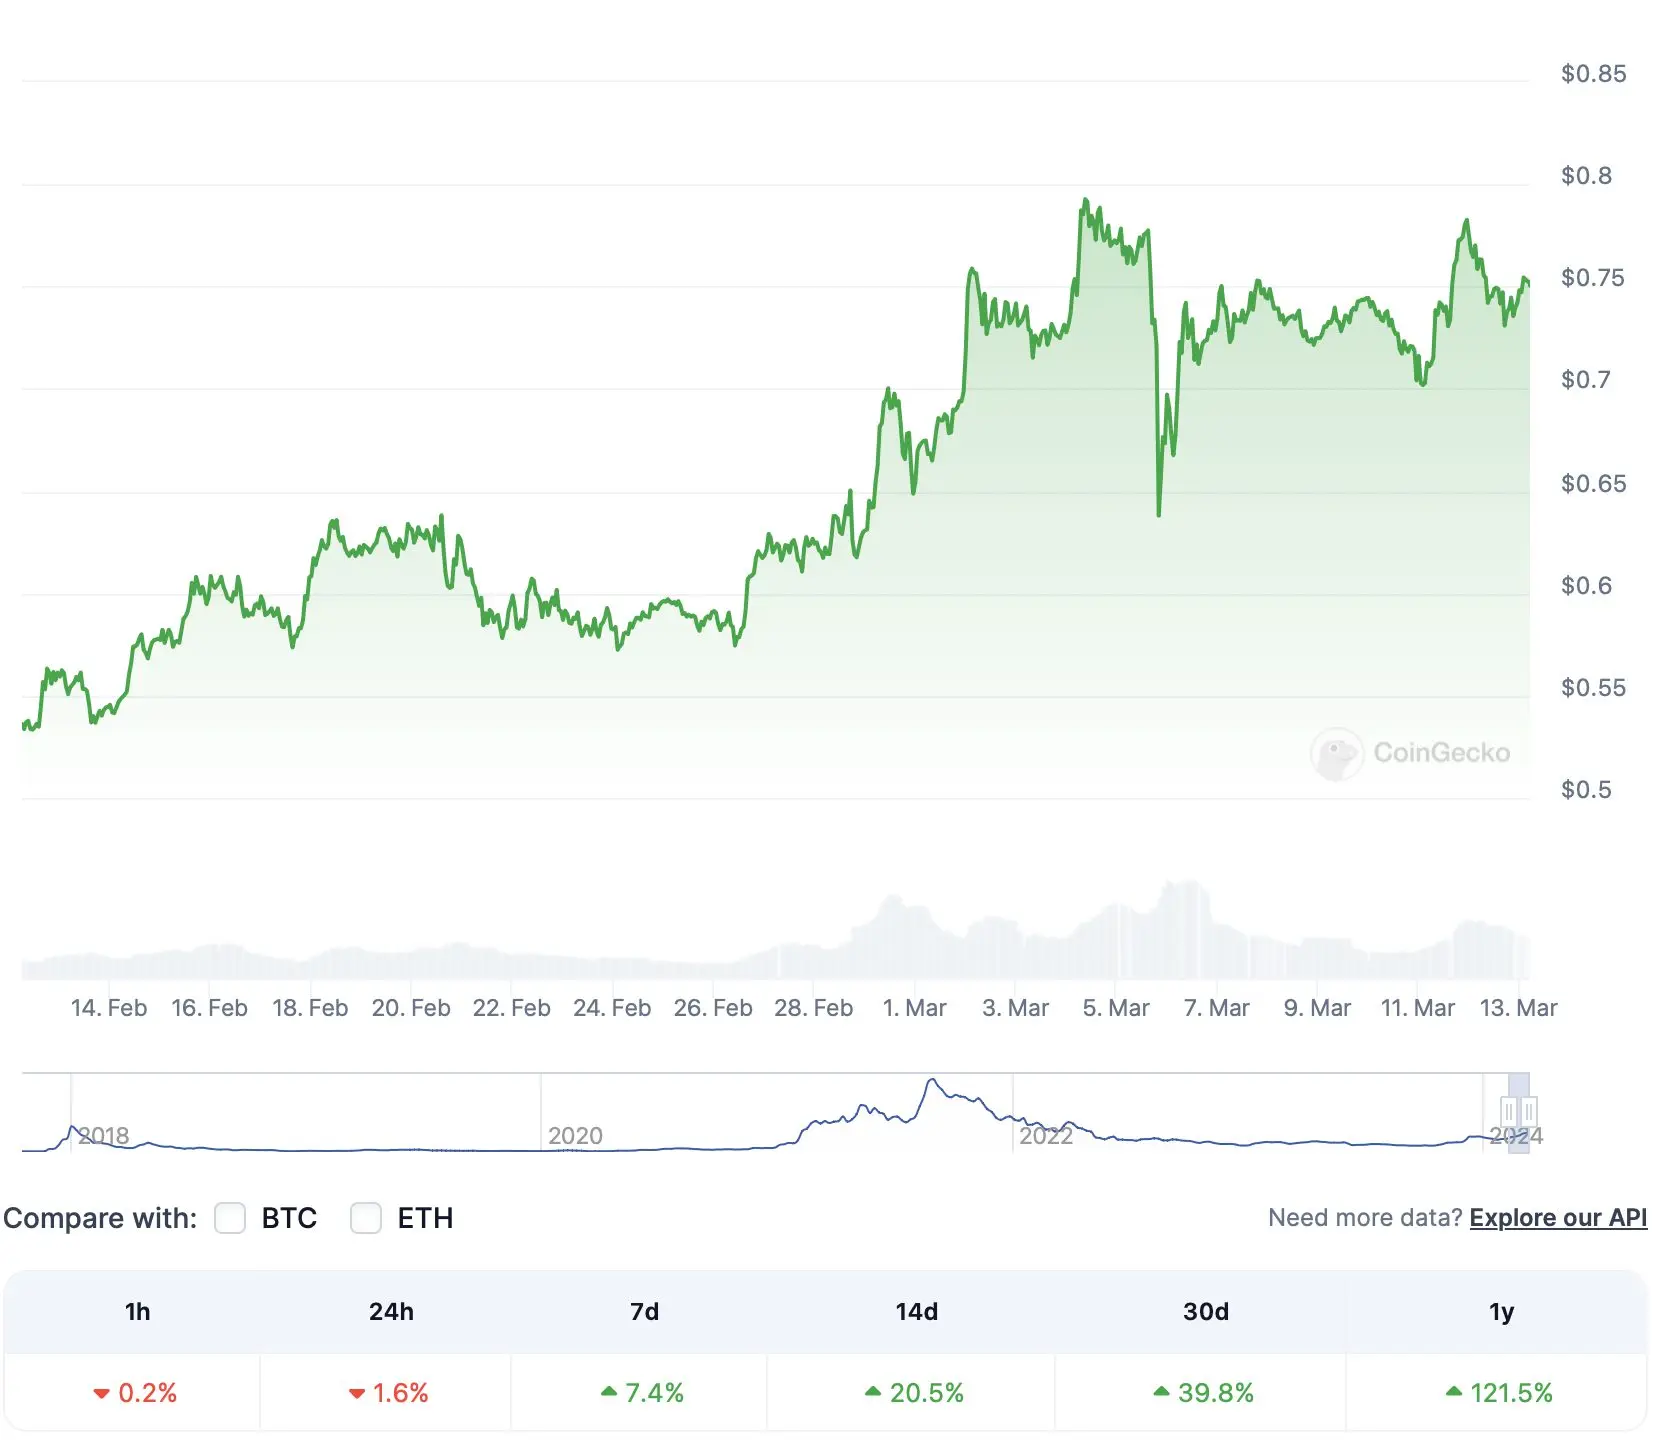 How did the cardano price react to the latest developments?